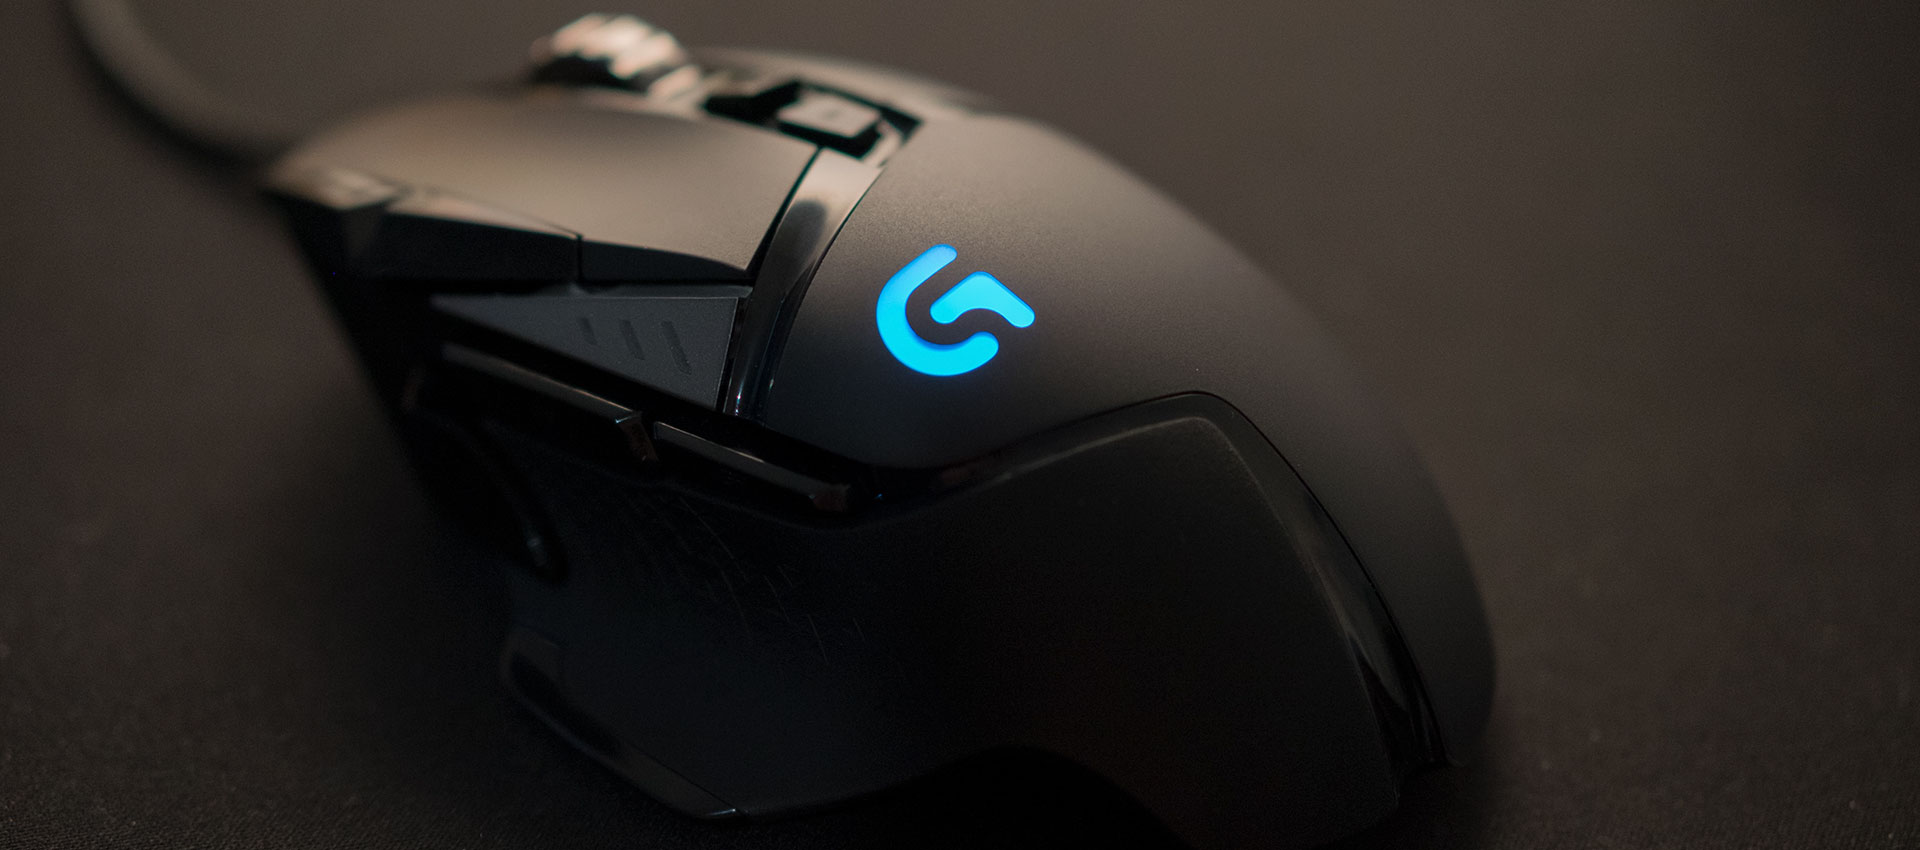 10 Best Gaming Mouse You Can Have In Pakistan